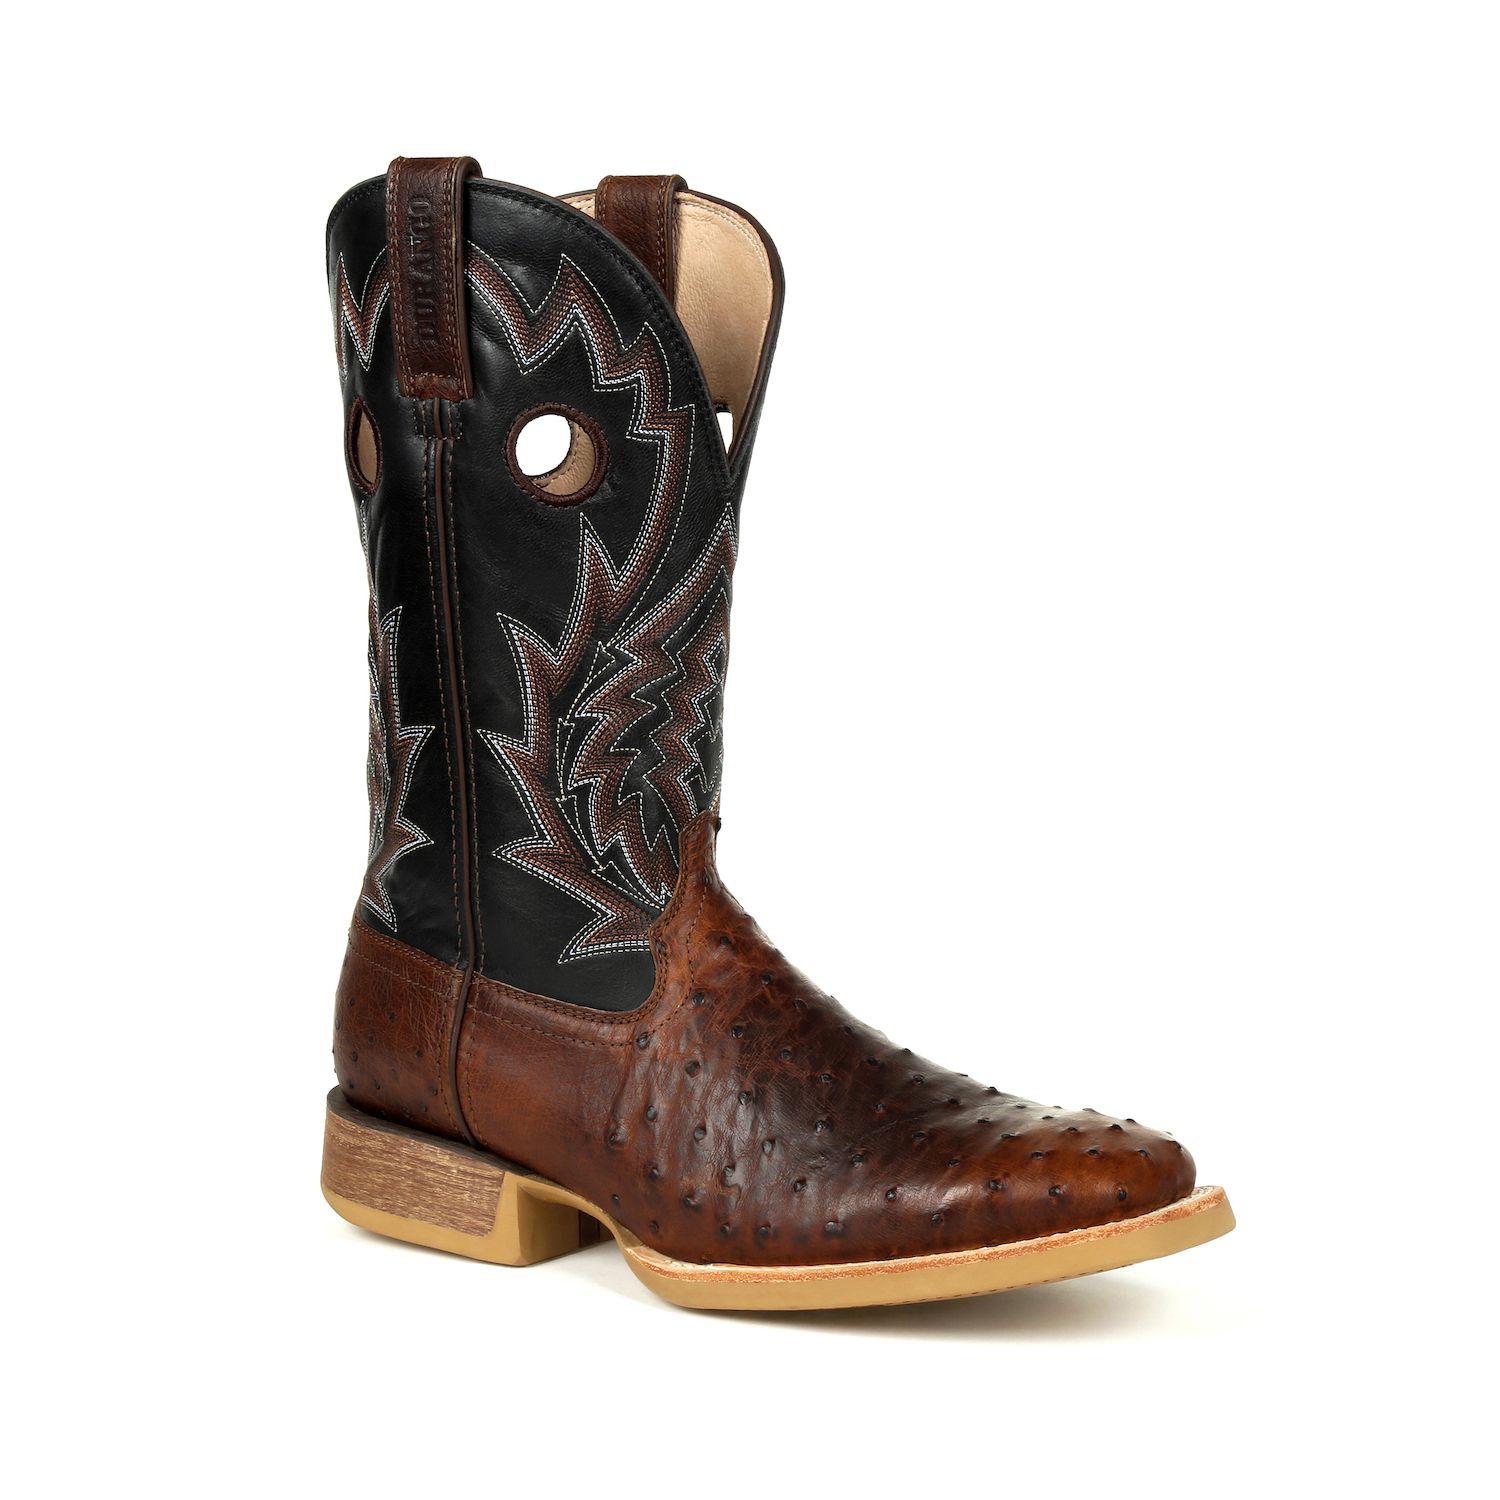 Image for Durango Rebel Pro Oiled Saddle Ostrich Men's Western Boots at Kohl's.